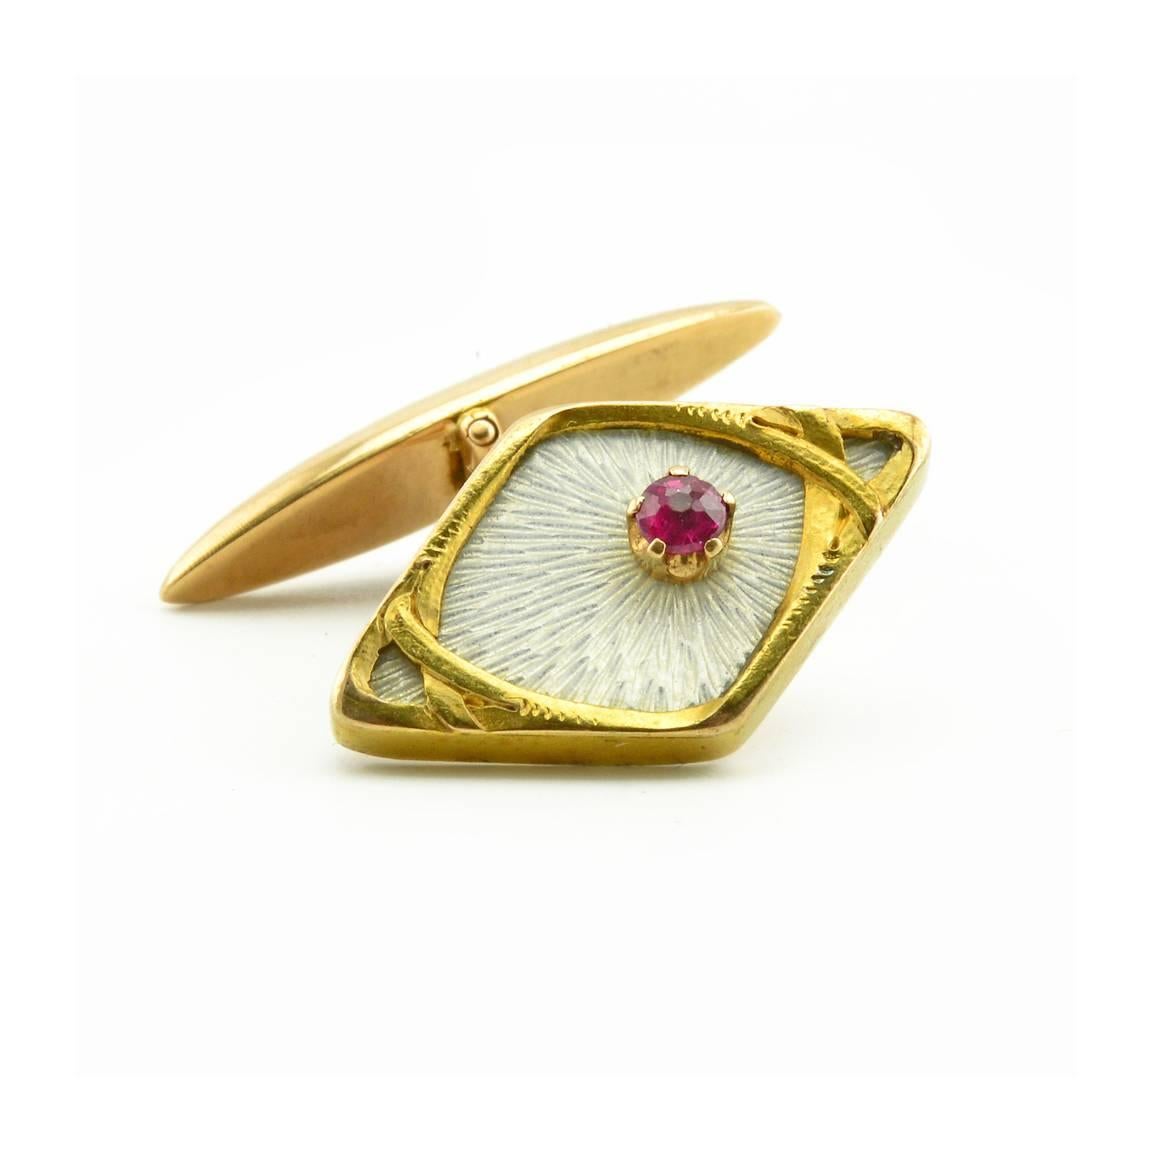 A pair of Russian gold, translucent enamel, and ruby cufflinks, St. Petersburg, 1908-1917. In Art Nouveau taste, the links of navette form, enamelled translucent white over a hatched sunburst ground and with rose cut rubies set off center, all